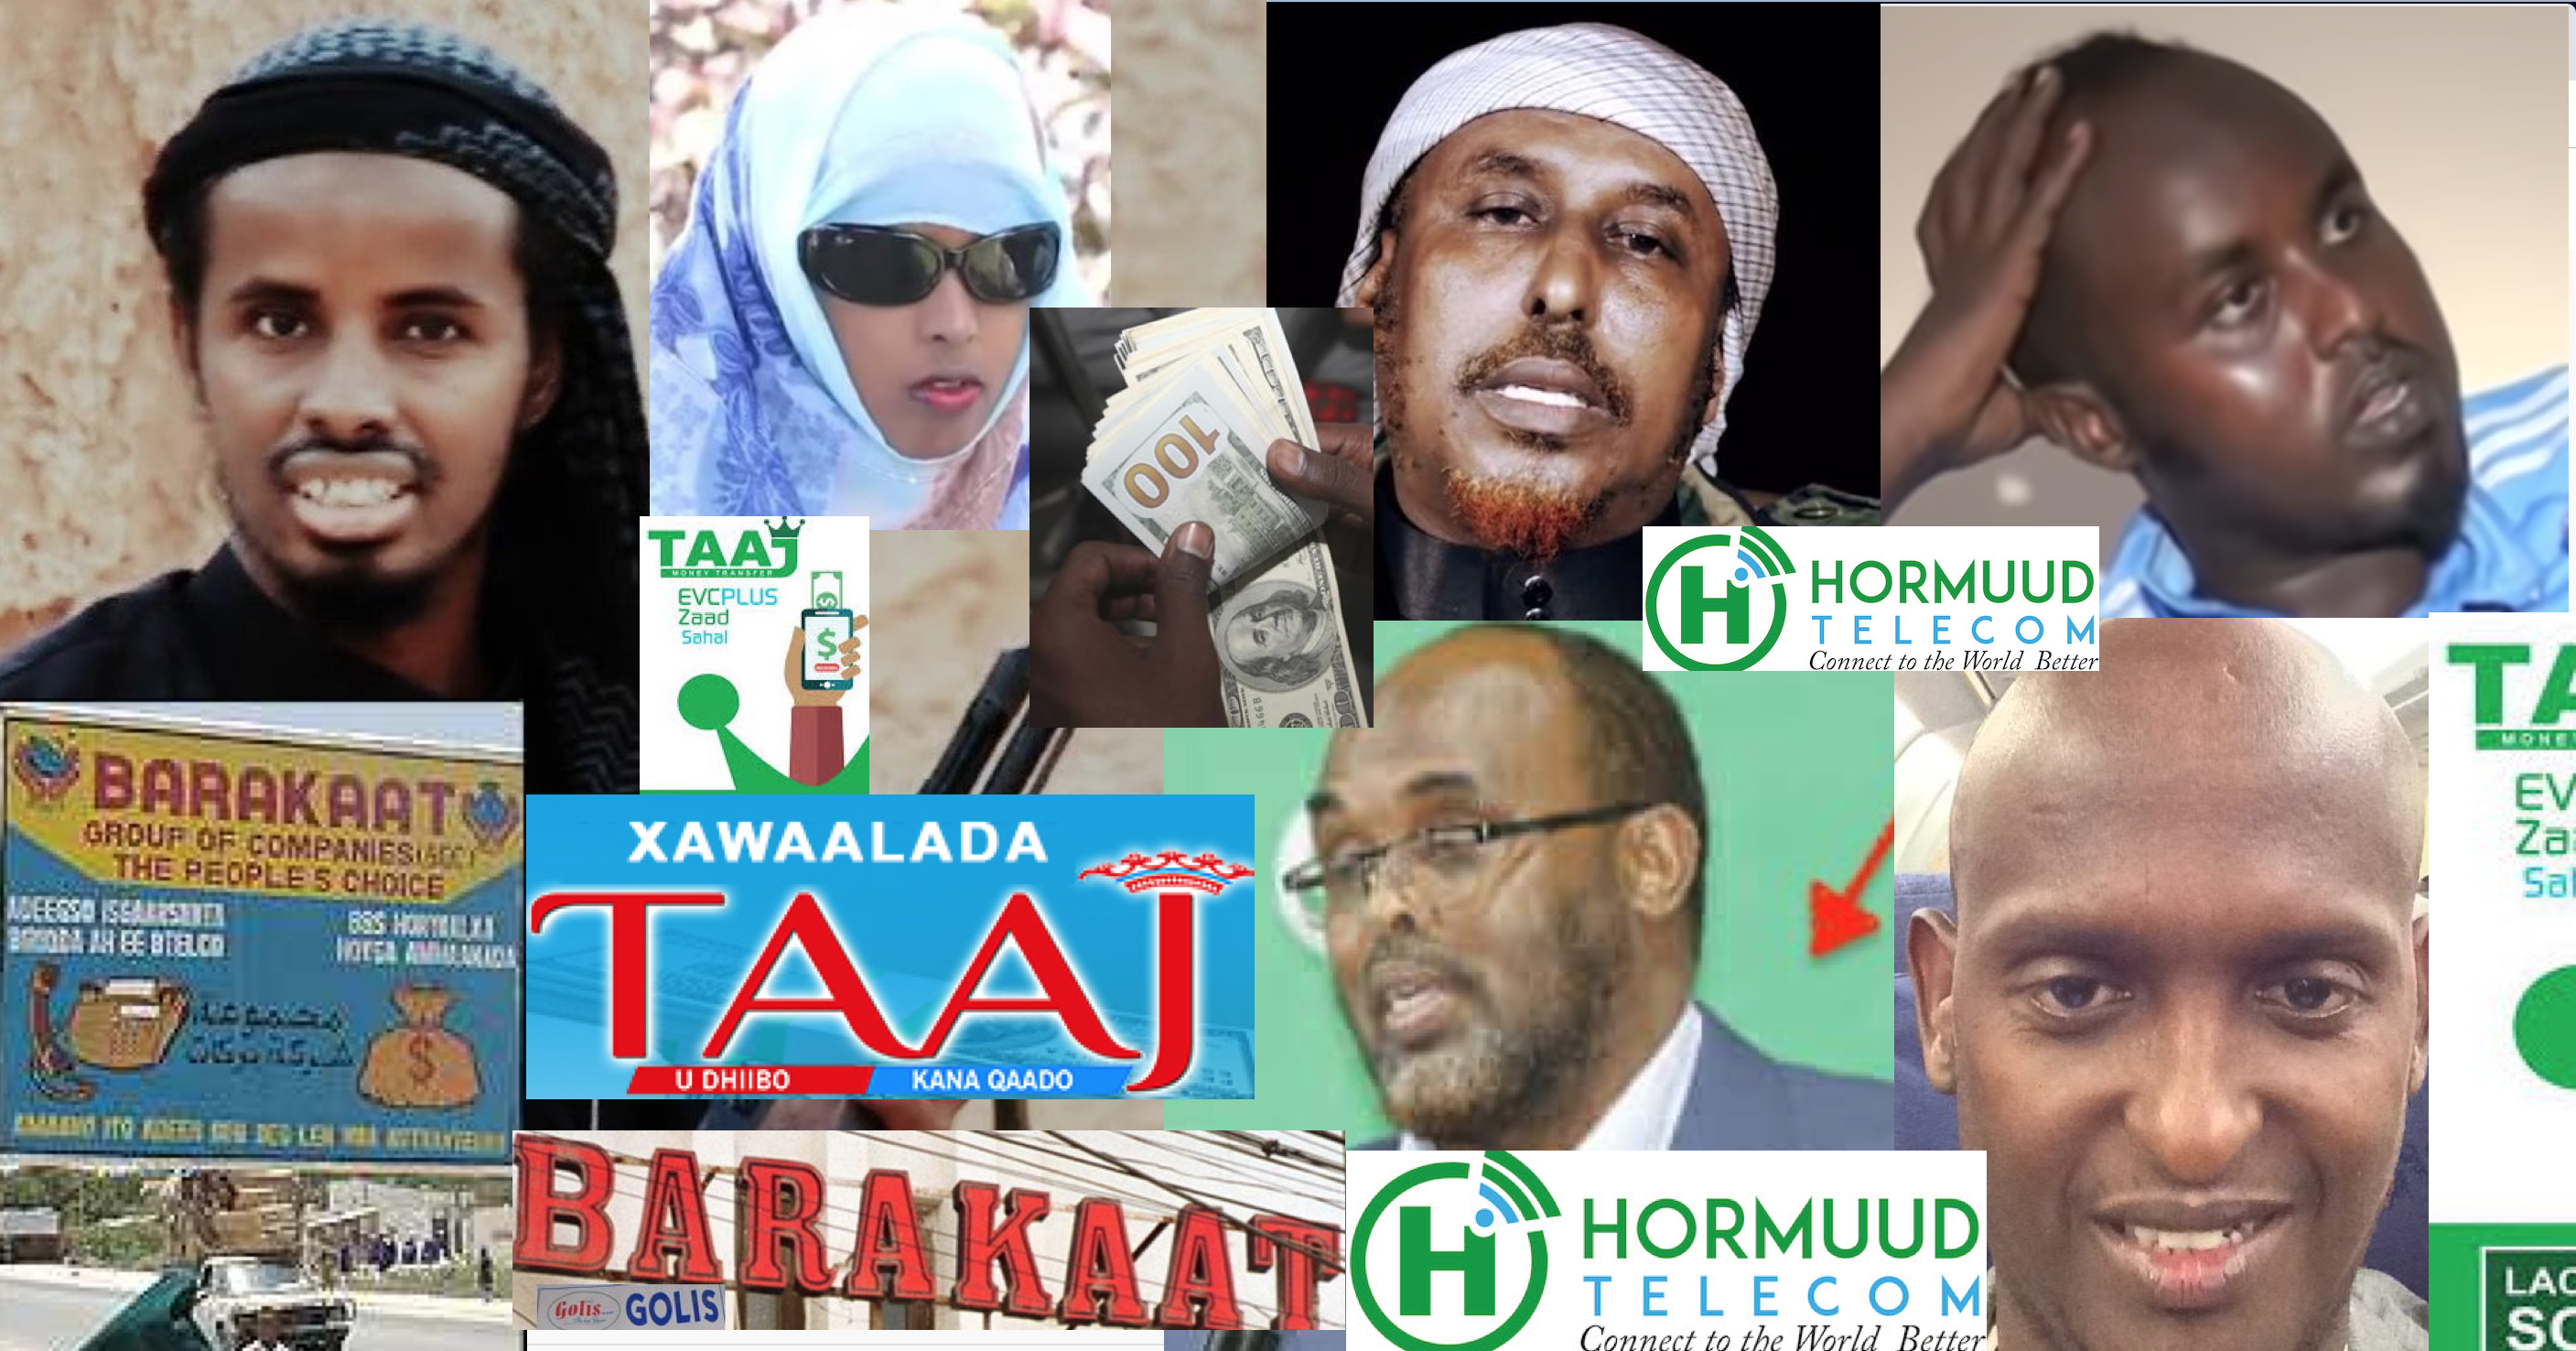 Somalia:Hormuud Telecom is the backbone of the terrorists in east and Horn of Africa